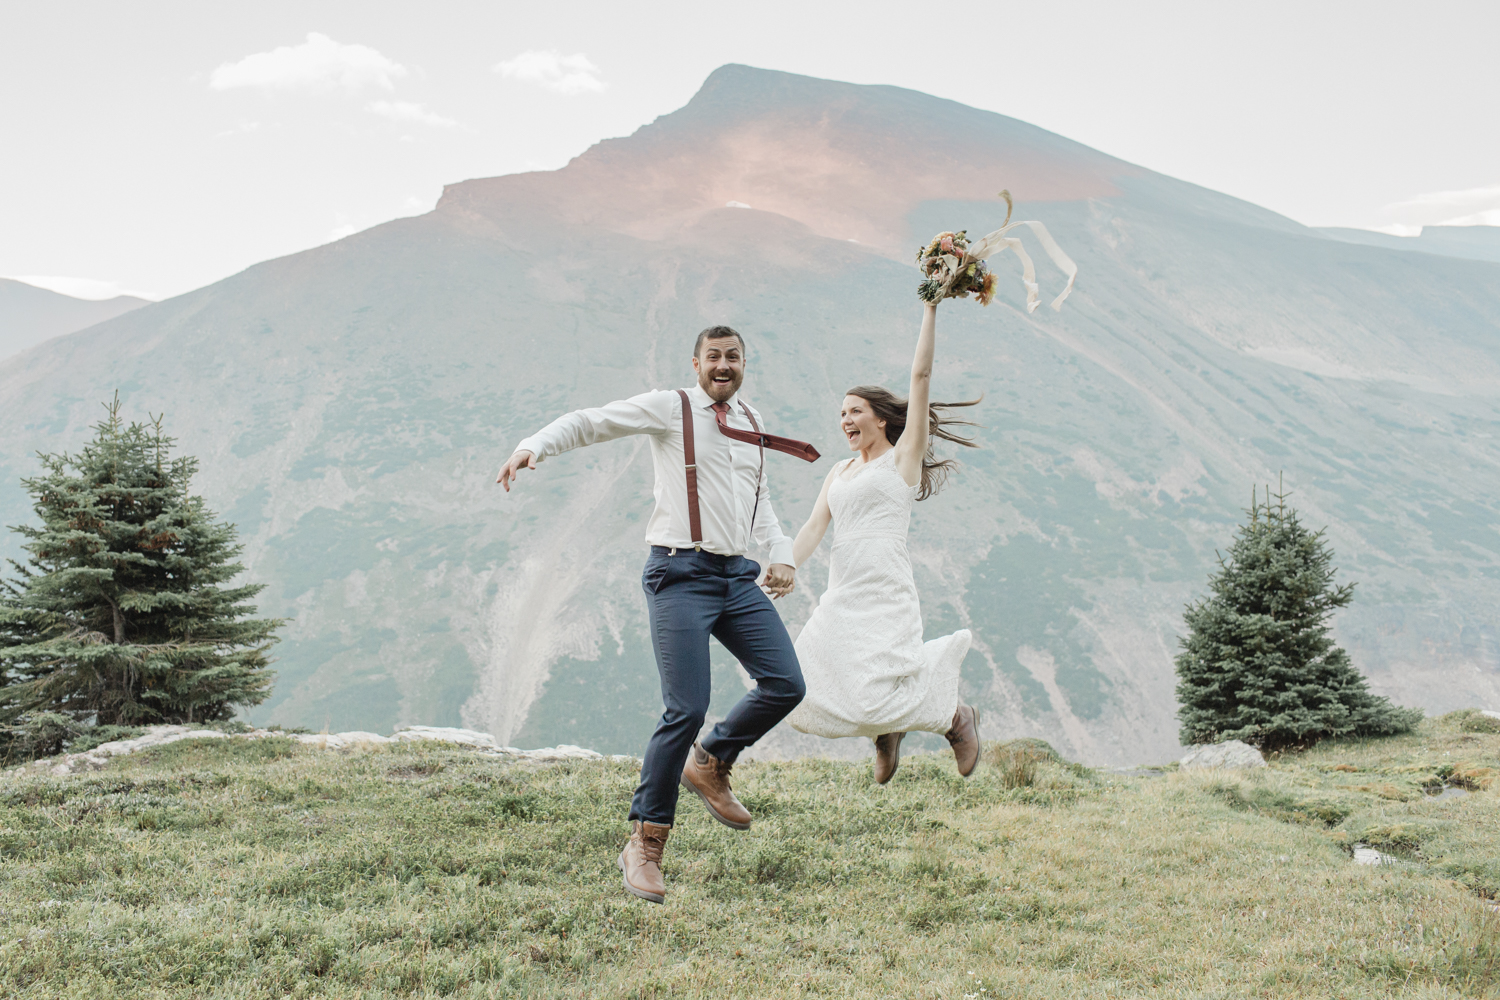 couple jumping in excitement after their wedding at the top of a mountain near banff national park